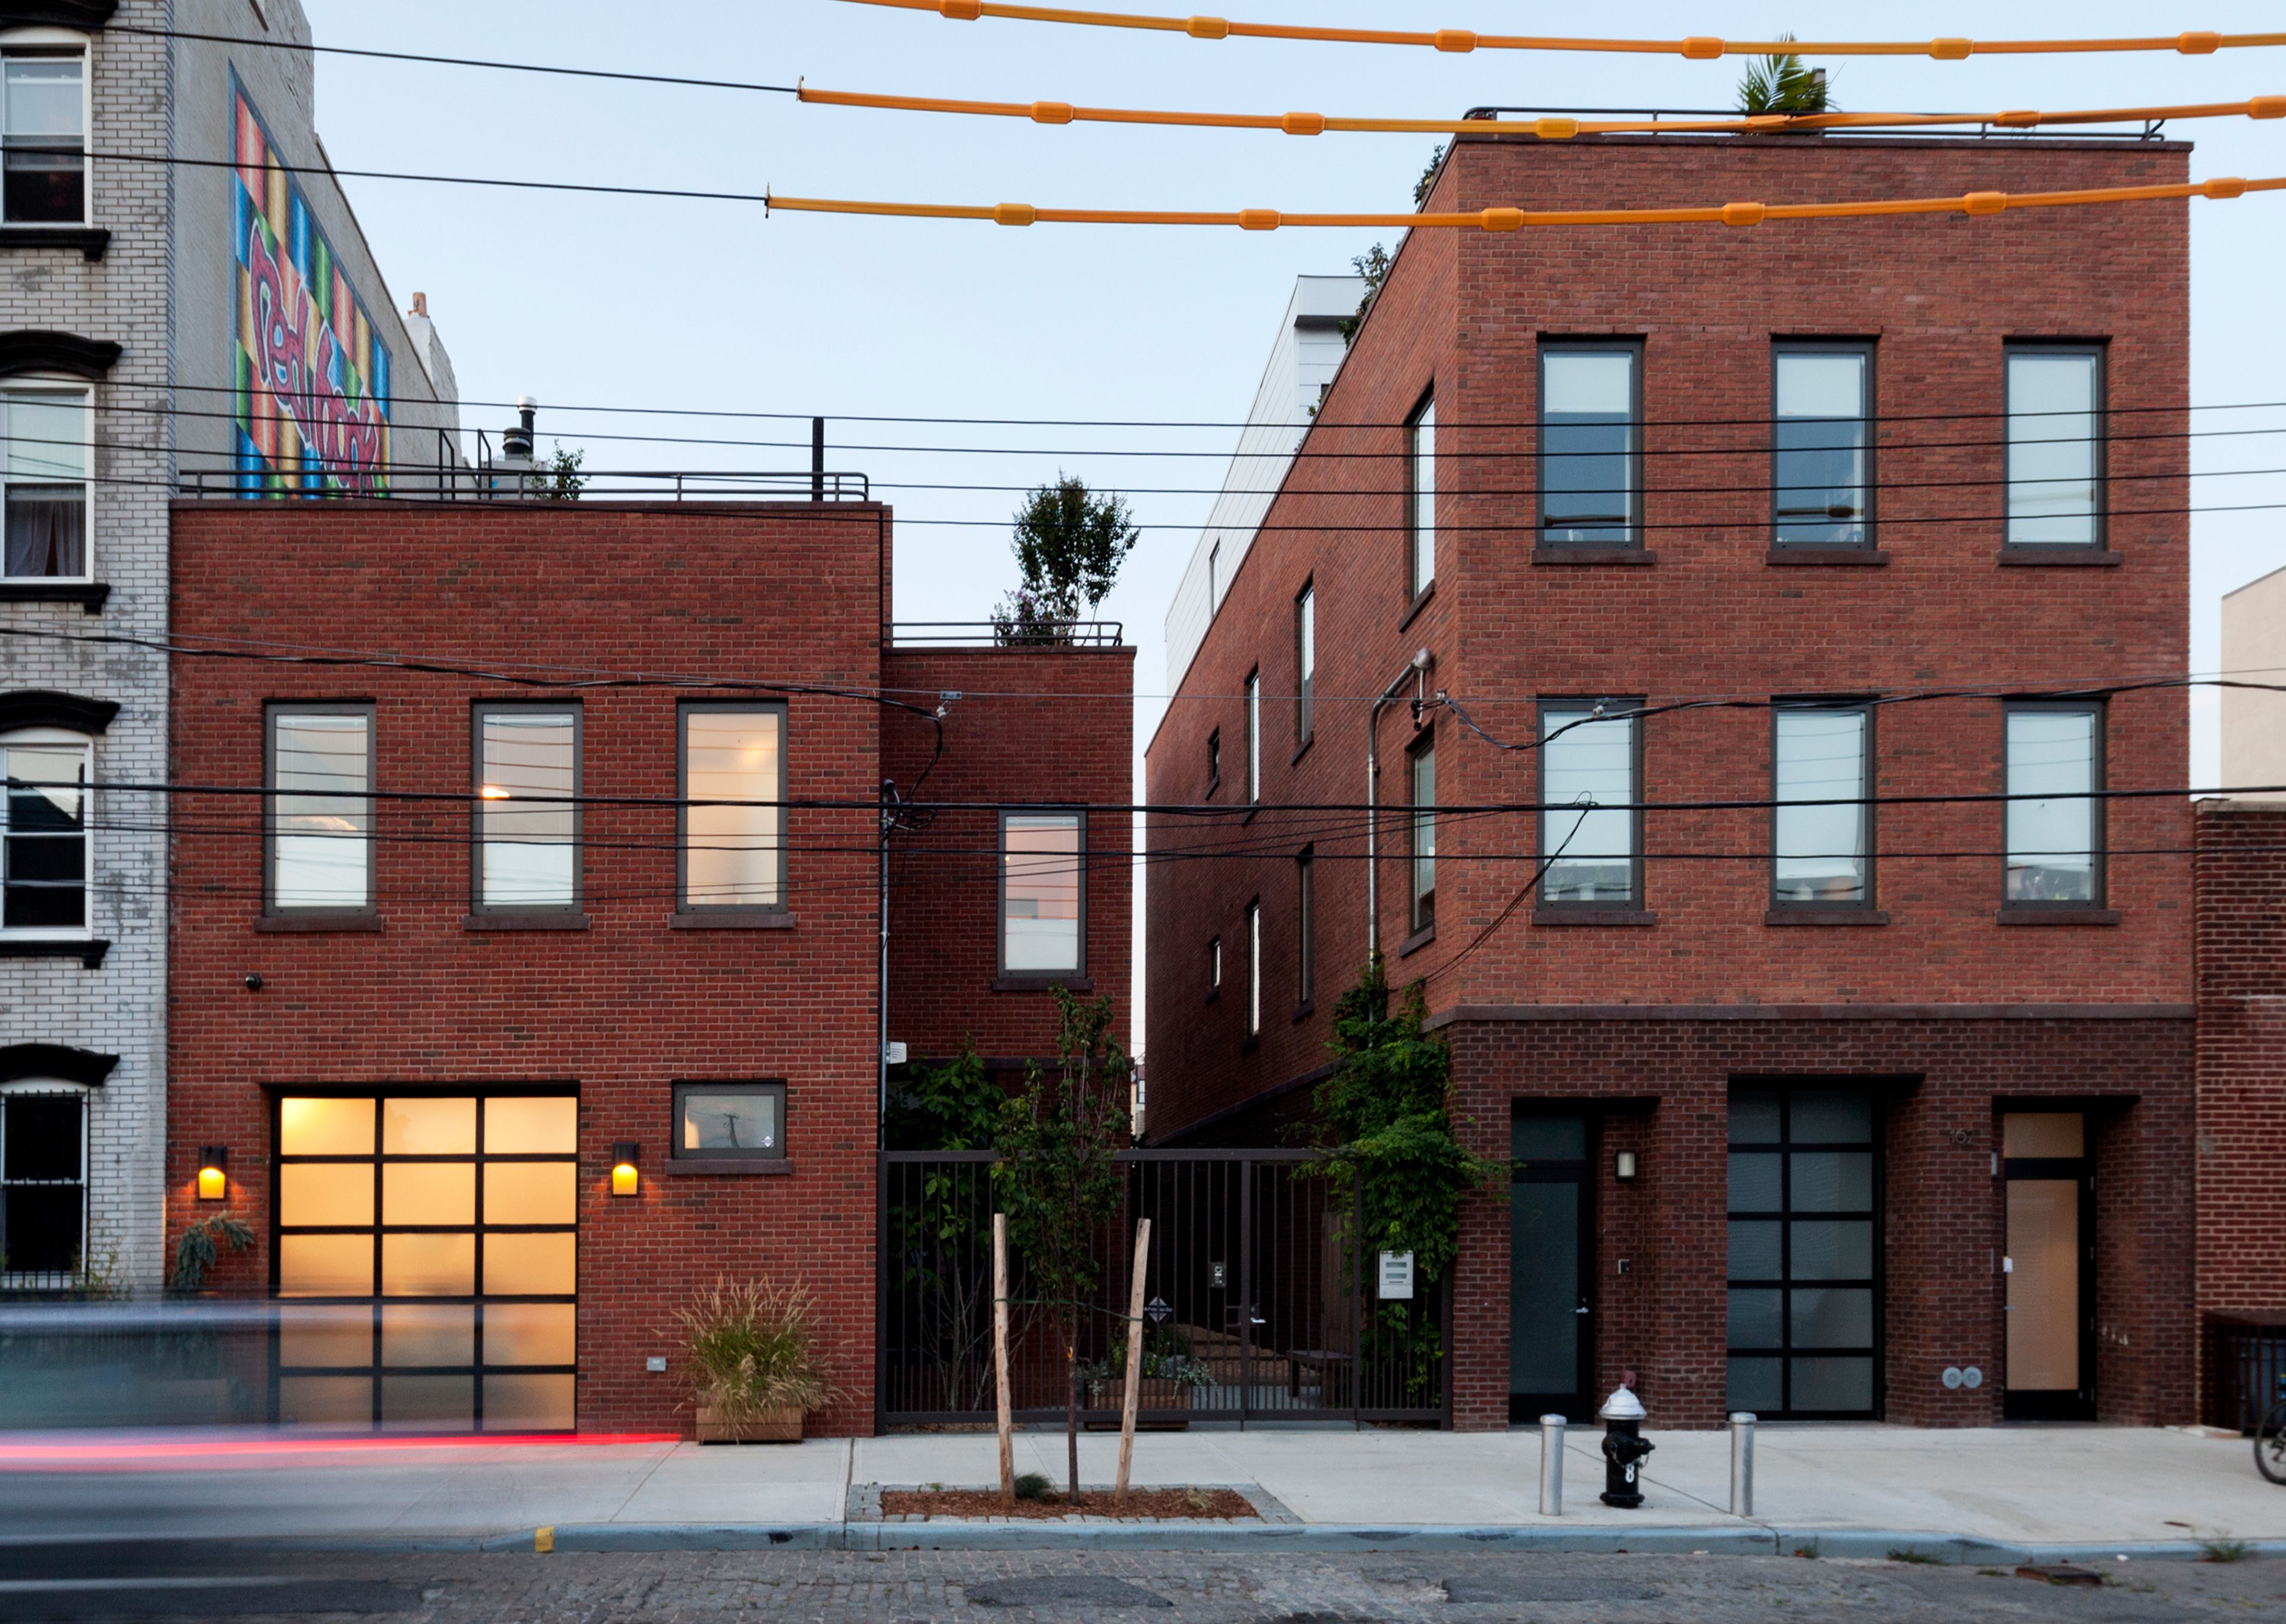 The Brooklyn Studio Park Slope Rowhouse Extension